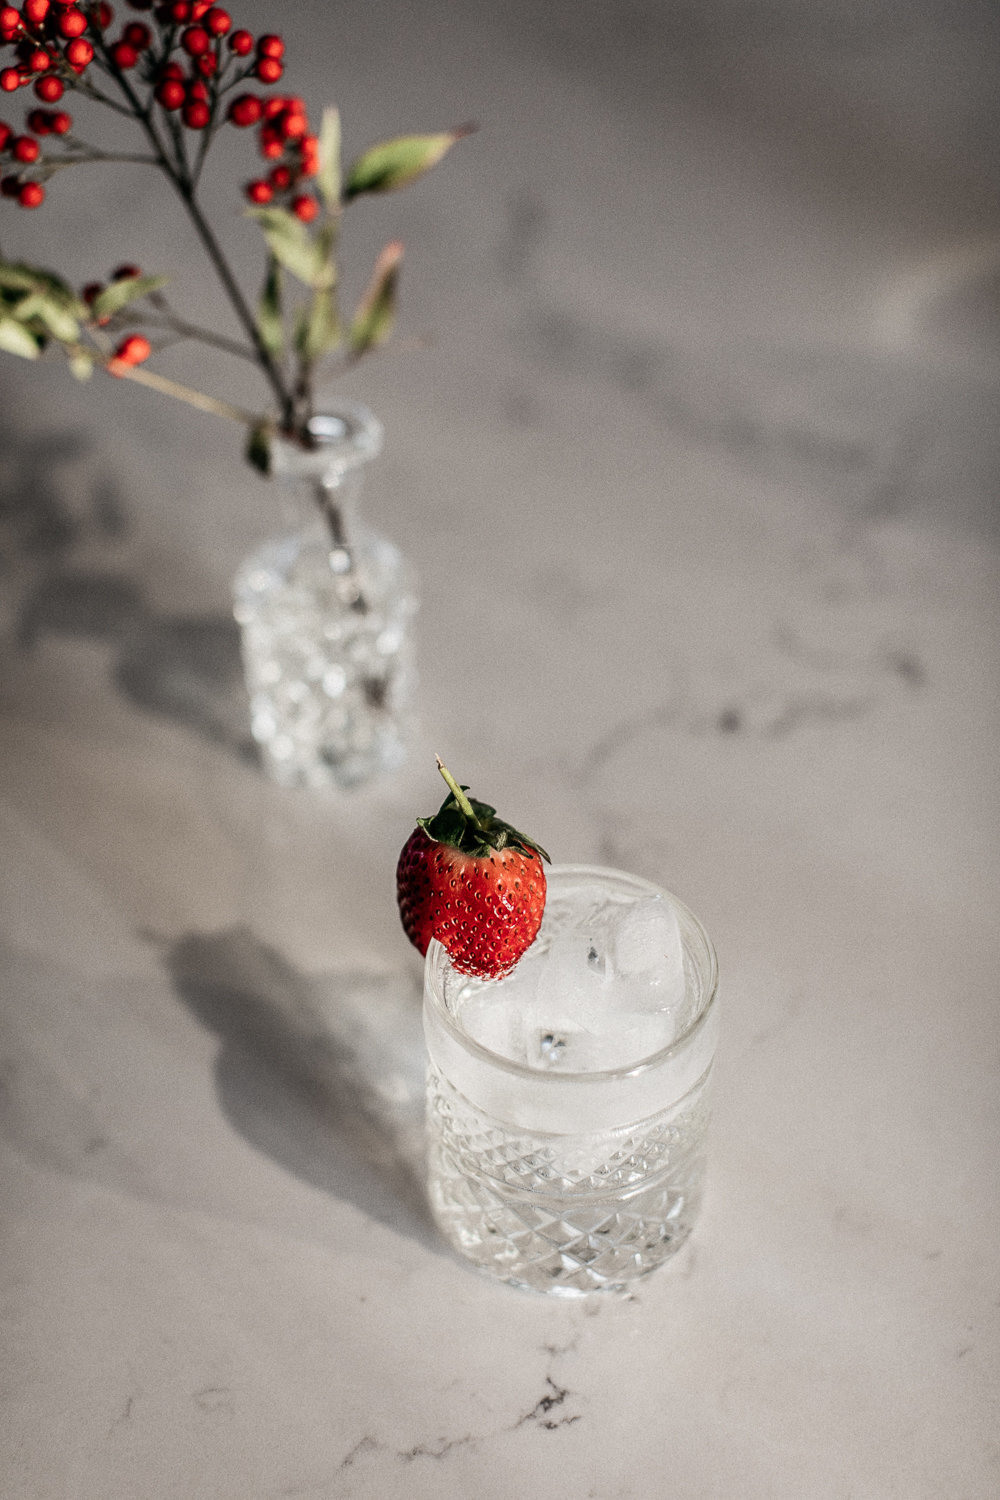 I Love Linen - Strawberry Water - Anisa Sabet - The Macadames - Food Travel Lifestyle Photographer-44